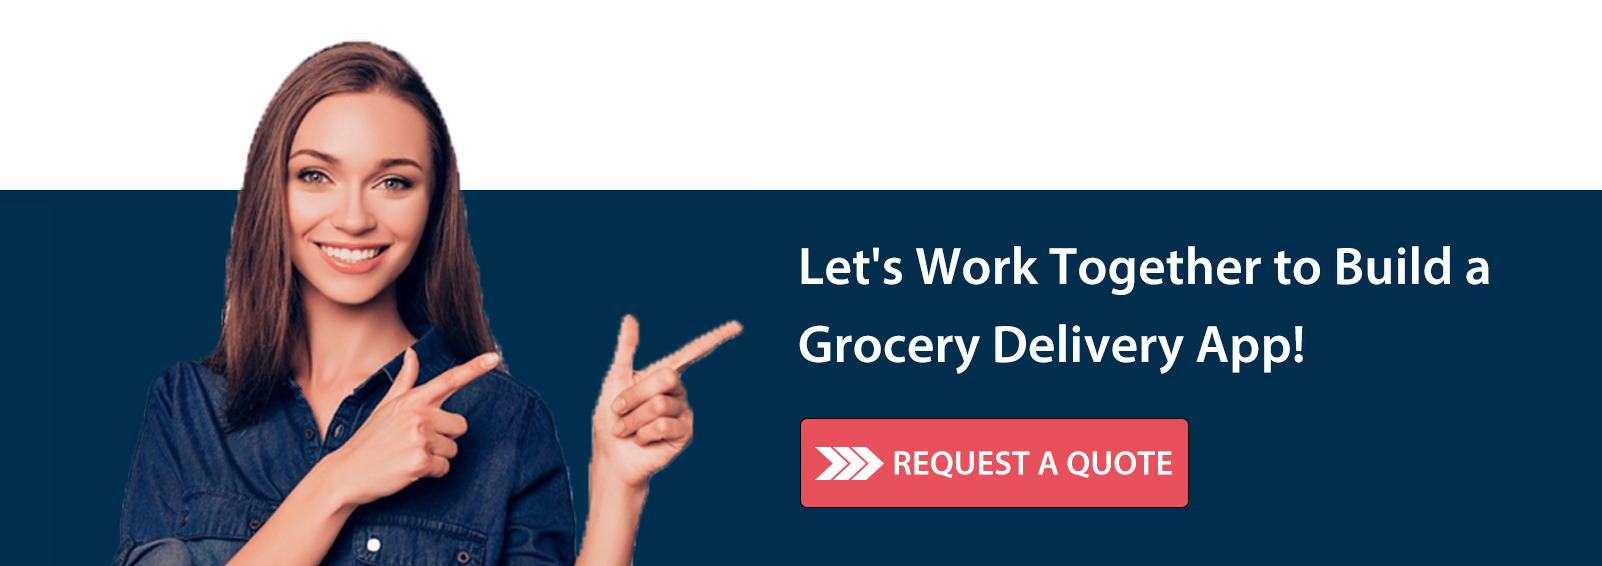 build a grocery delivery app cta